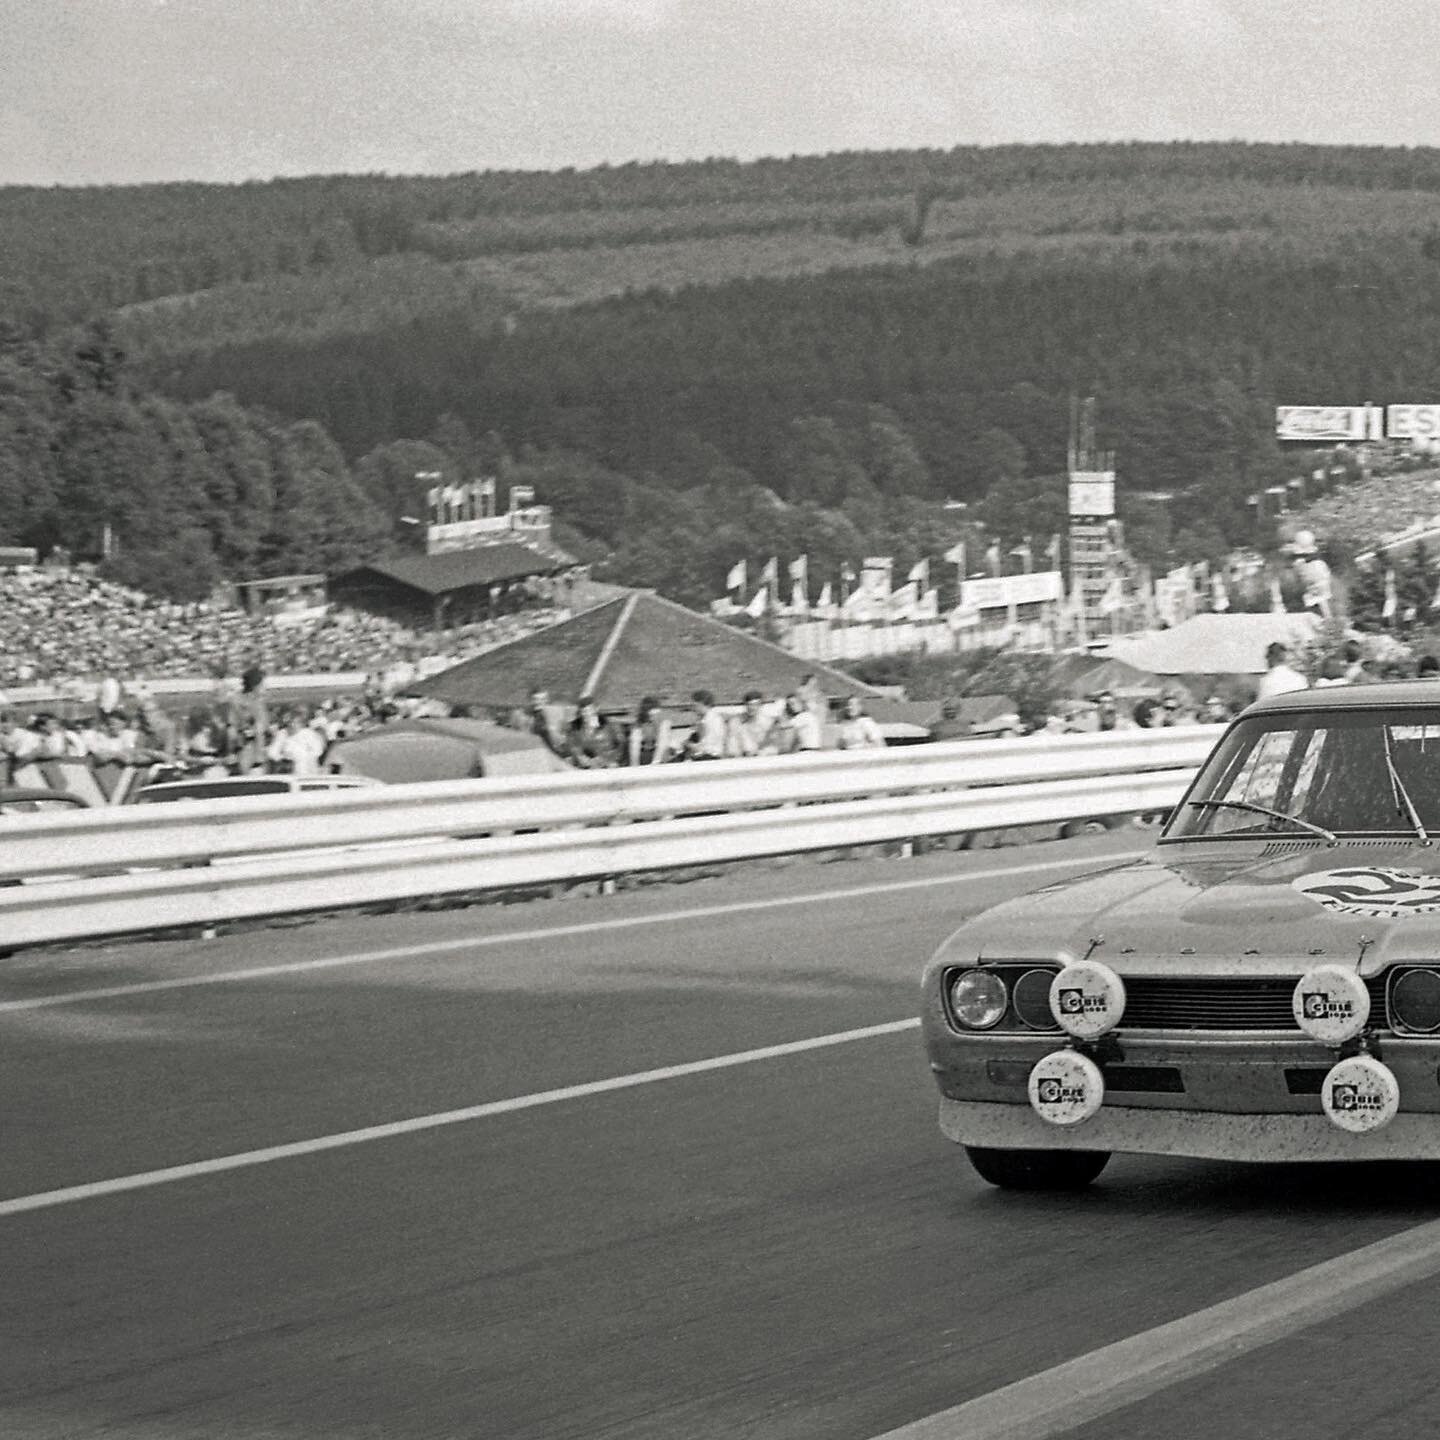 Dieter Glemser braking for La Source with his works Ford Capri RS2600. With Alex Soler-Roig, they would win the 1971 Spa 24 Hours.

😜 T. Borremans

#ford #fordcapri #fordcaprimk1 #fordcapri2600rs #fordcaprirs2600 #capri2600rs #caprirs2600 #etcc #eur